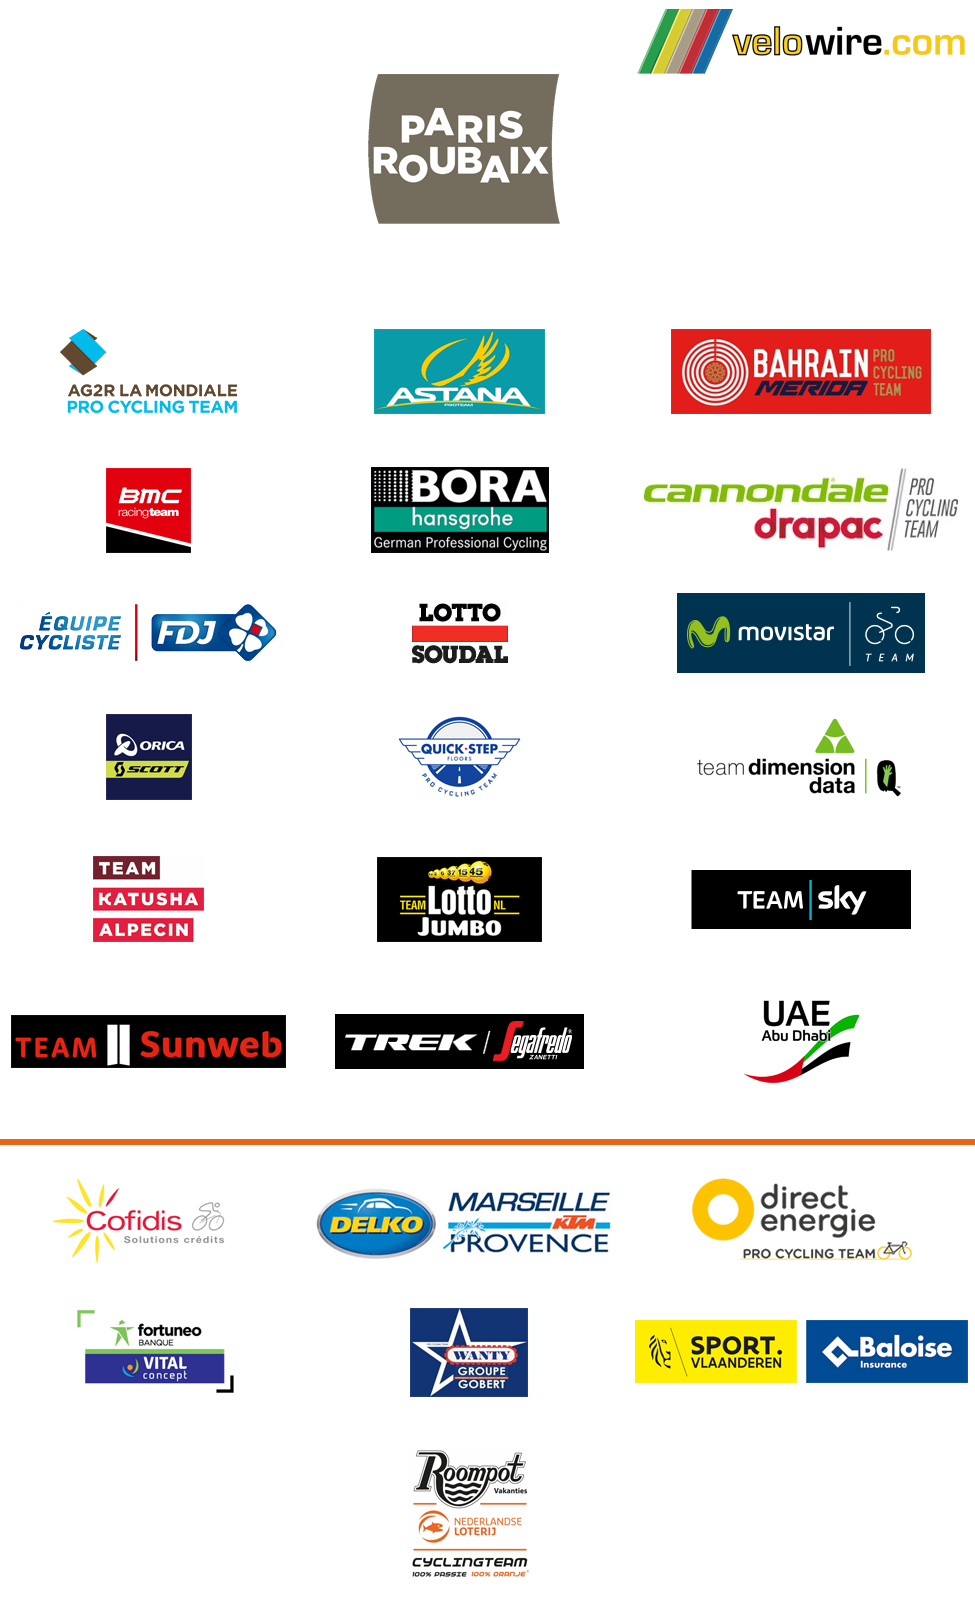 Team selections for the WorldTour races in France A.S.O. (Tour de